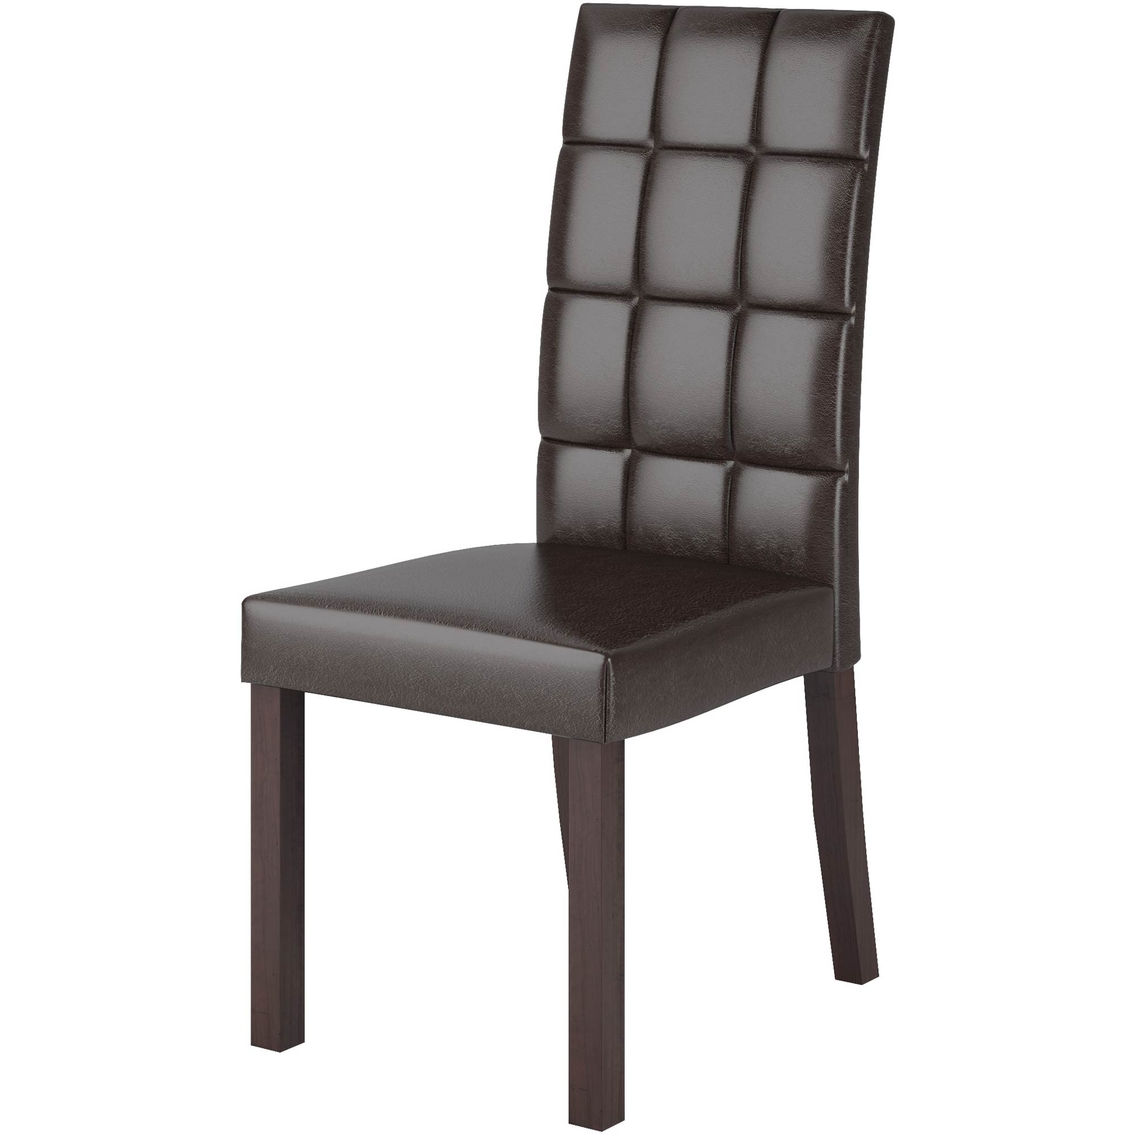 CorLiving DAL-895-C Atwood Leatherette Dining Chairs, Set of 2 - Image 2 of 3